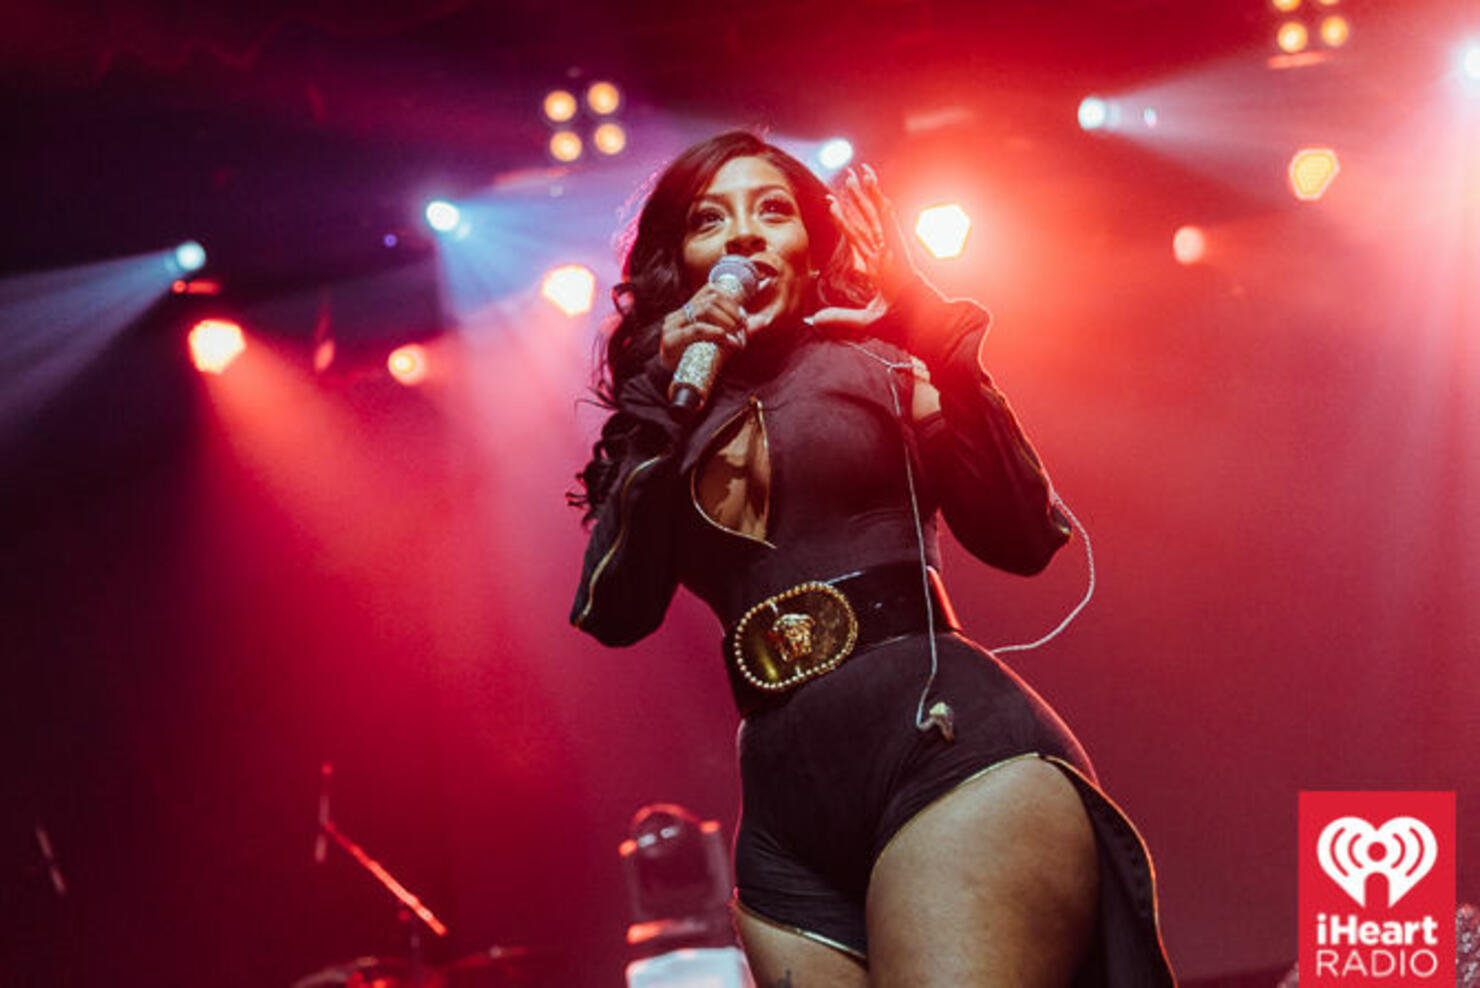 K. Michelle plays a sold out show at Webster Hall in NYC on March 29, 2016.